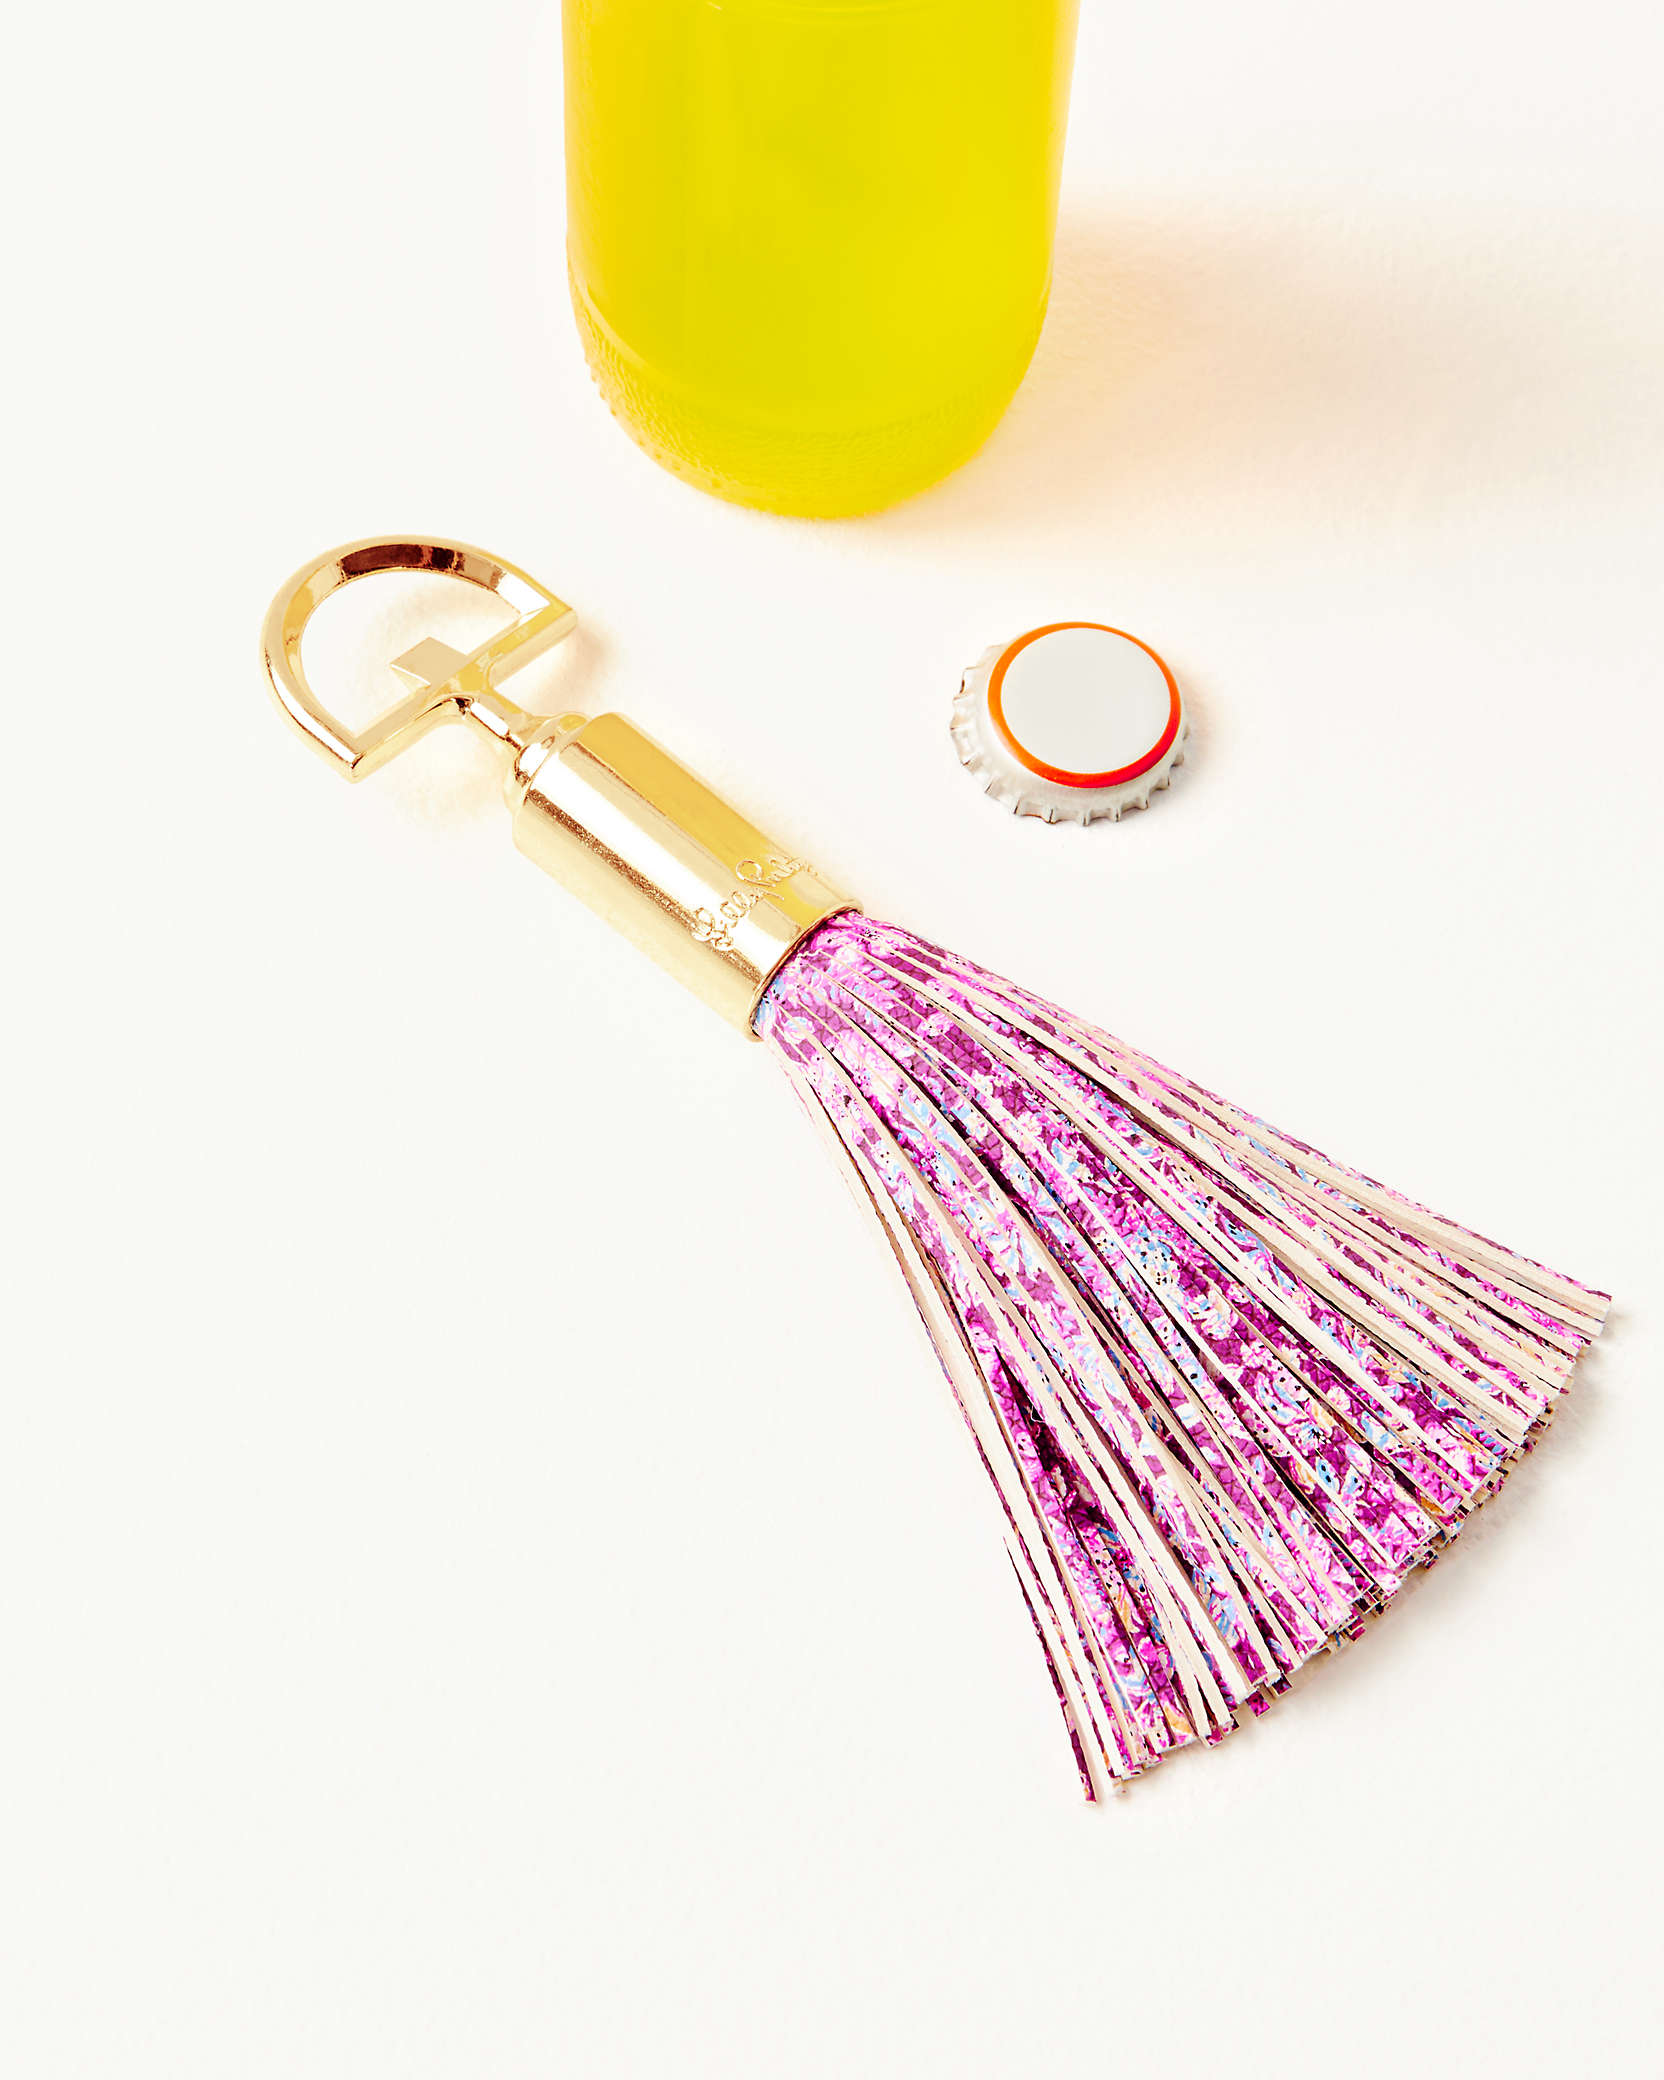 Lilly Pulitzer Tassel Bottle Opener In Amarena Cherry Tropical With A Twist